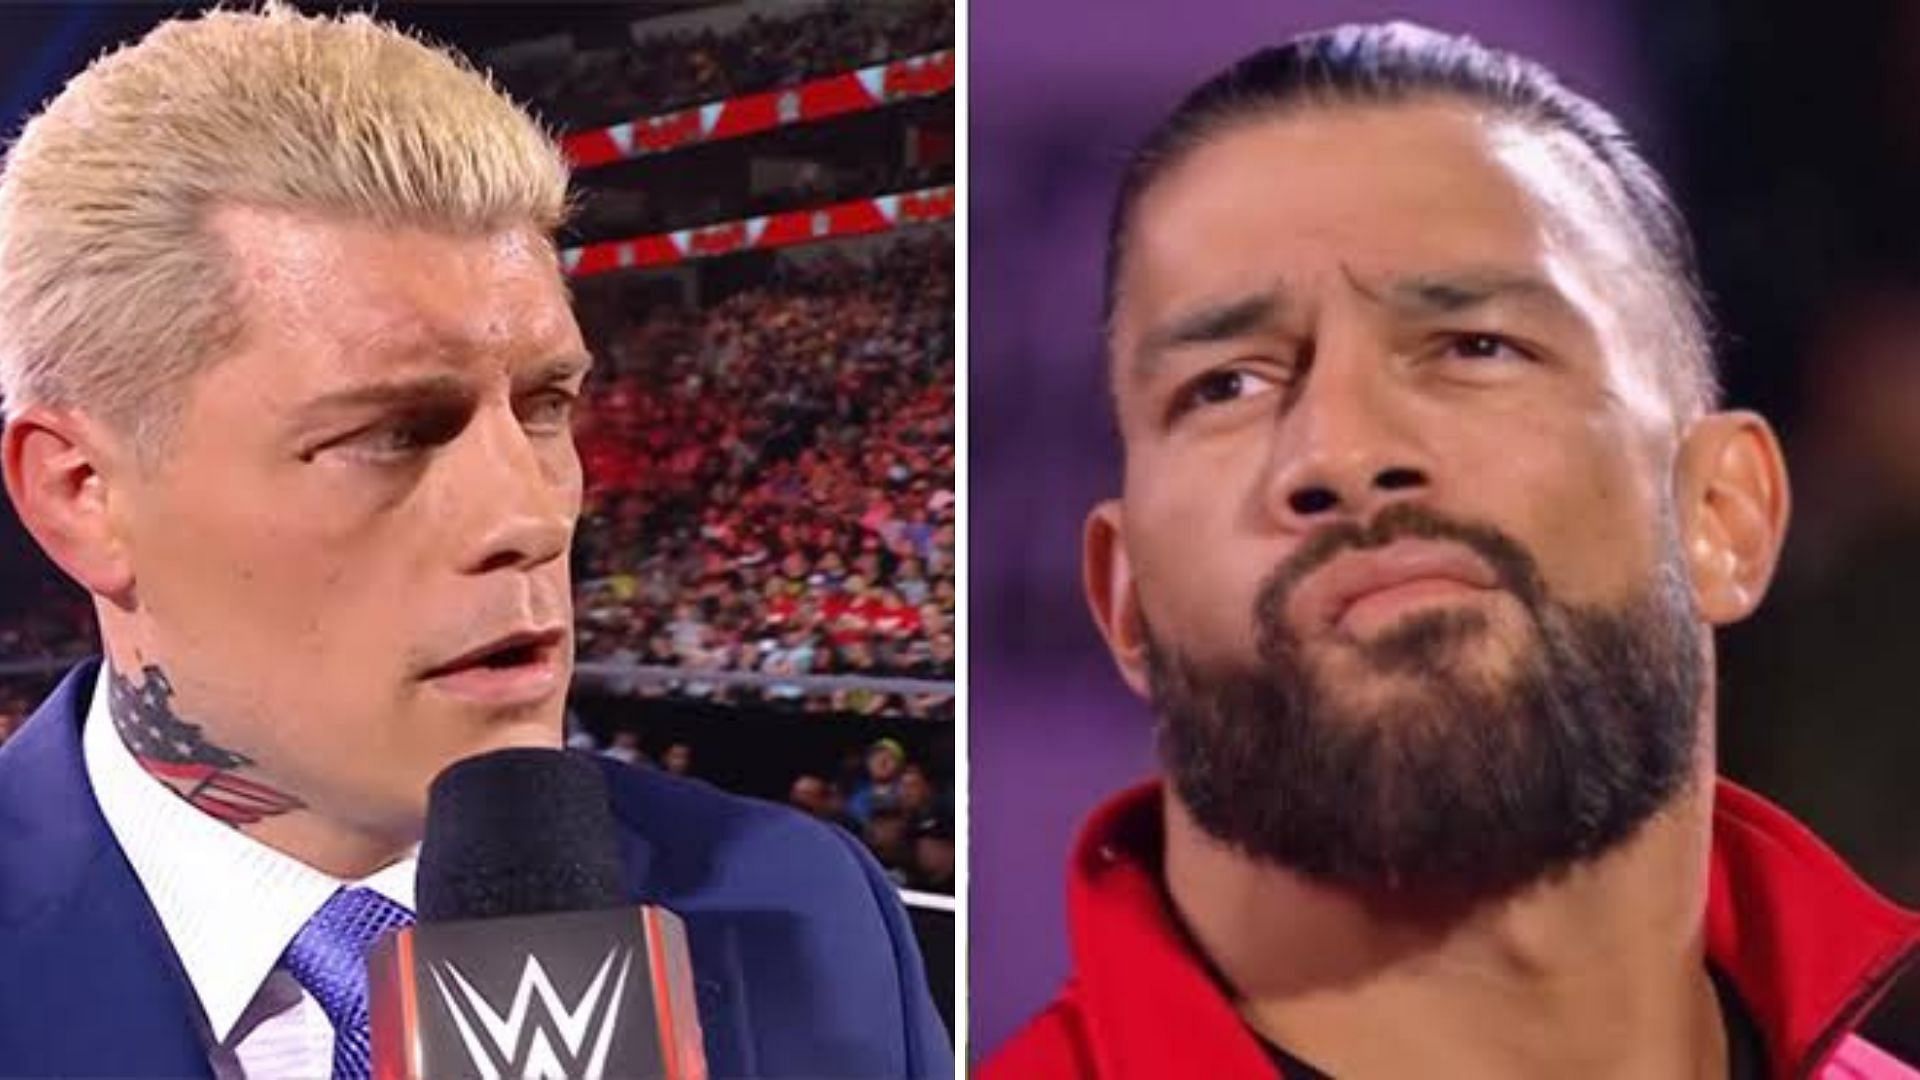 Roman Reigns and Cody Rhodes would clash at Mania.